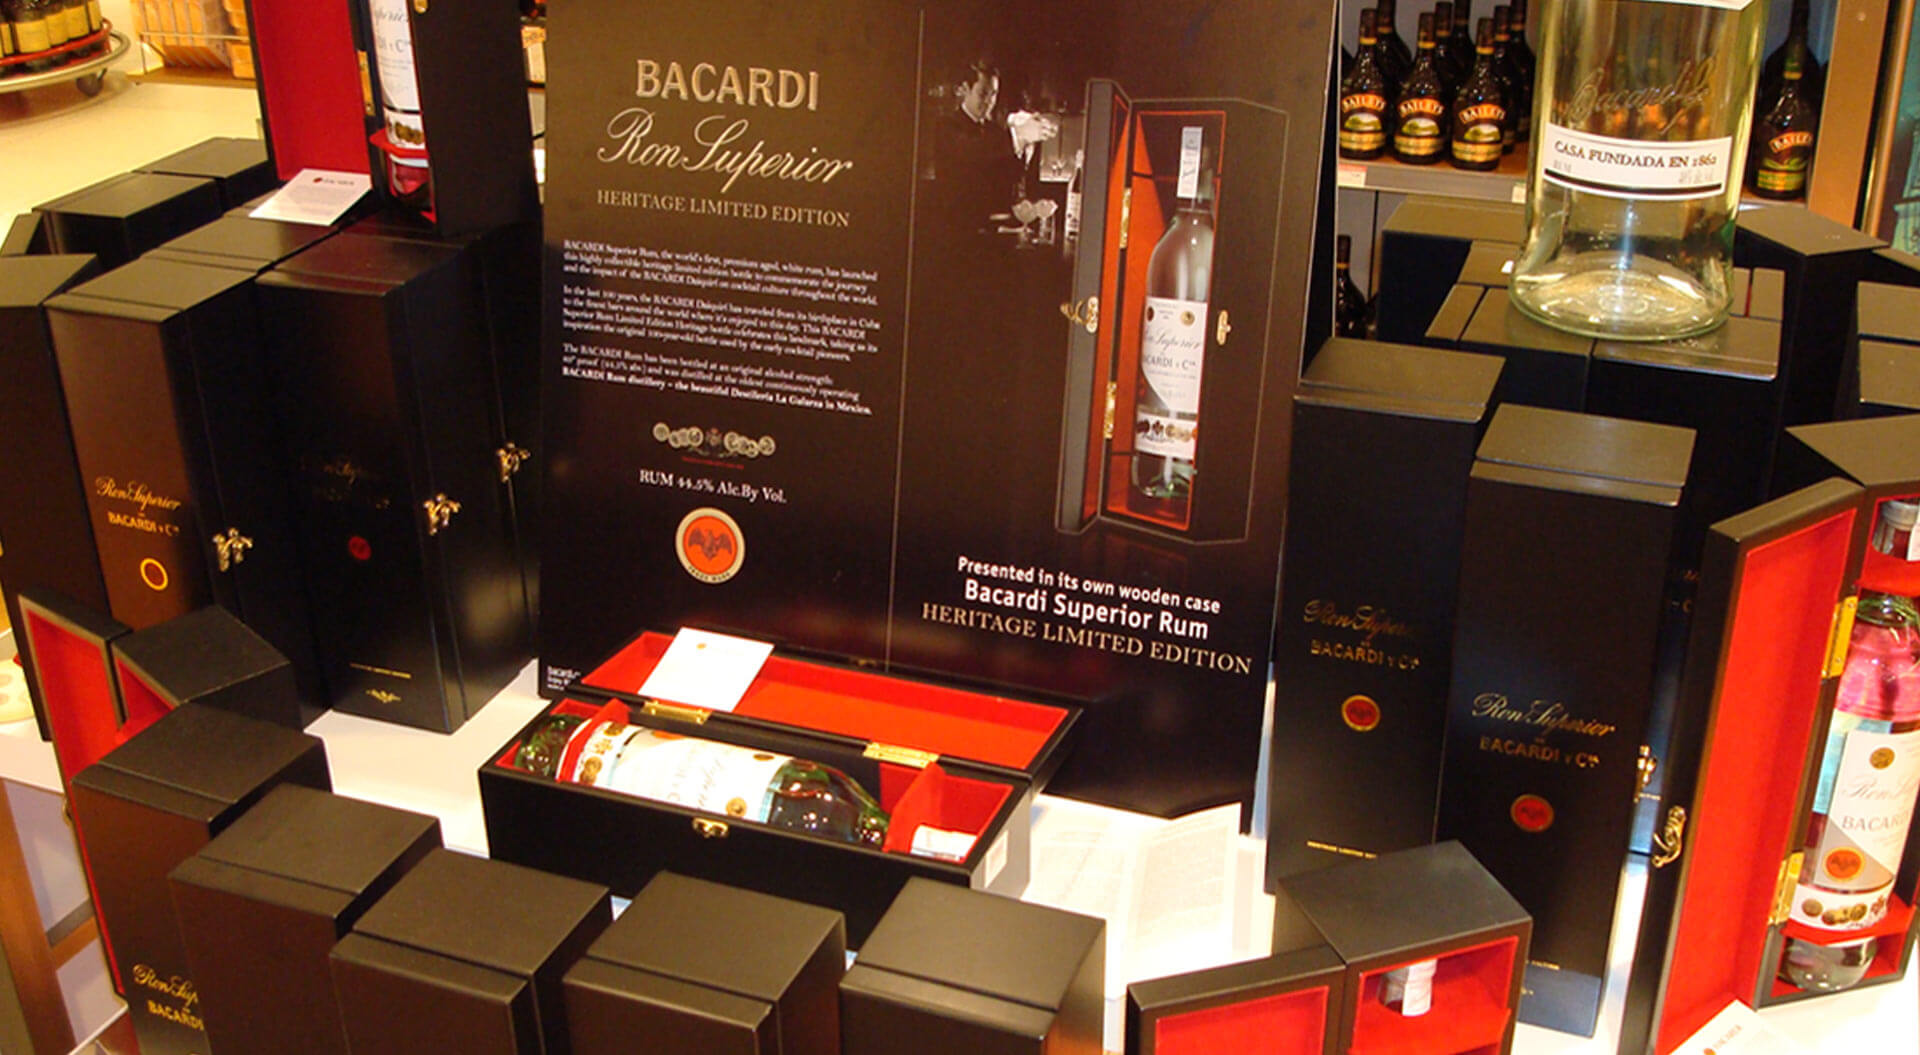 Bacardi Heritage Ron Superior Limited Edition merchandising display brand identity and promotionduty free airports 